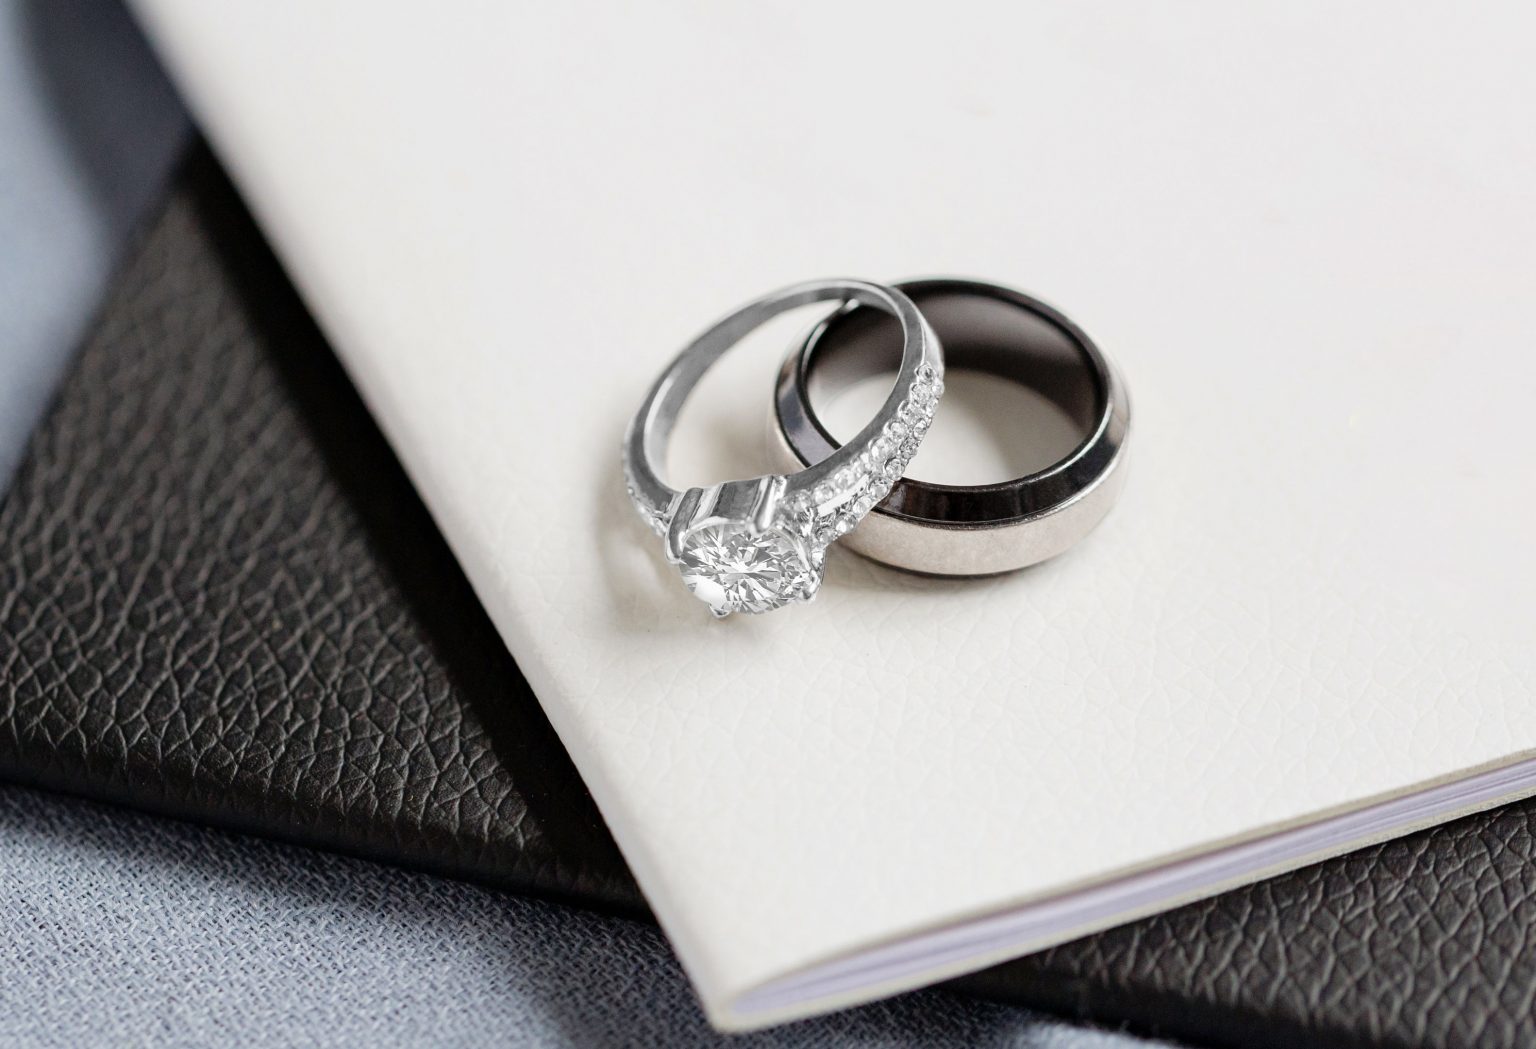 Choosing the Right Metal for Engagement Rings